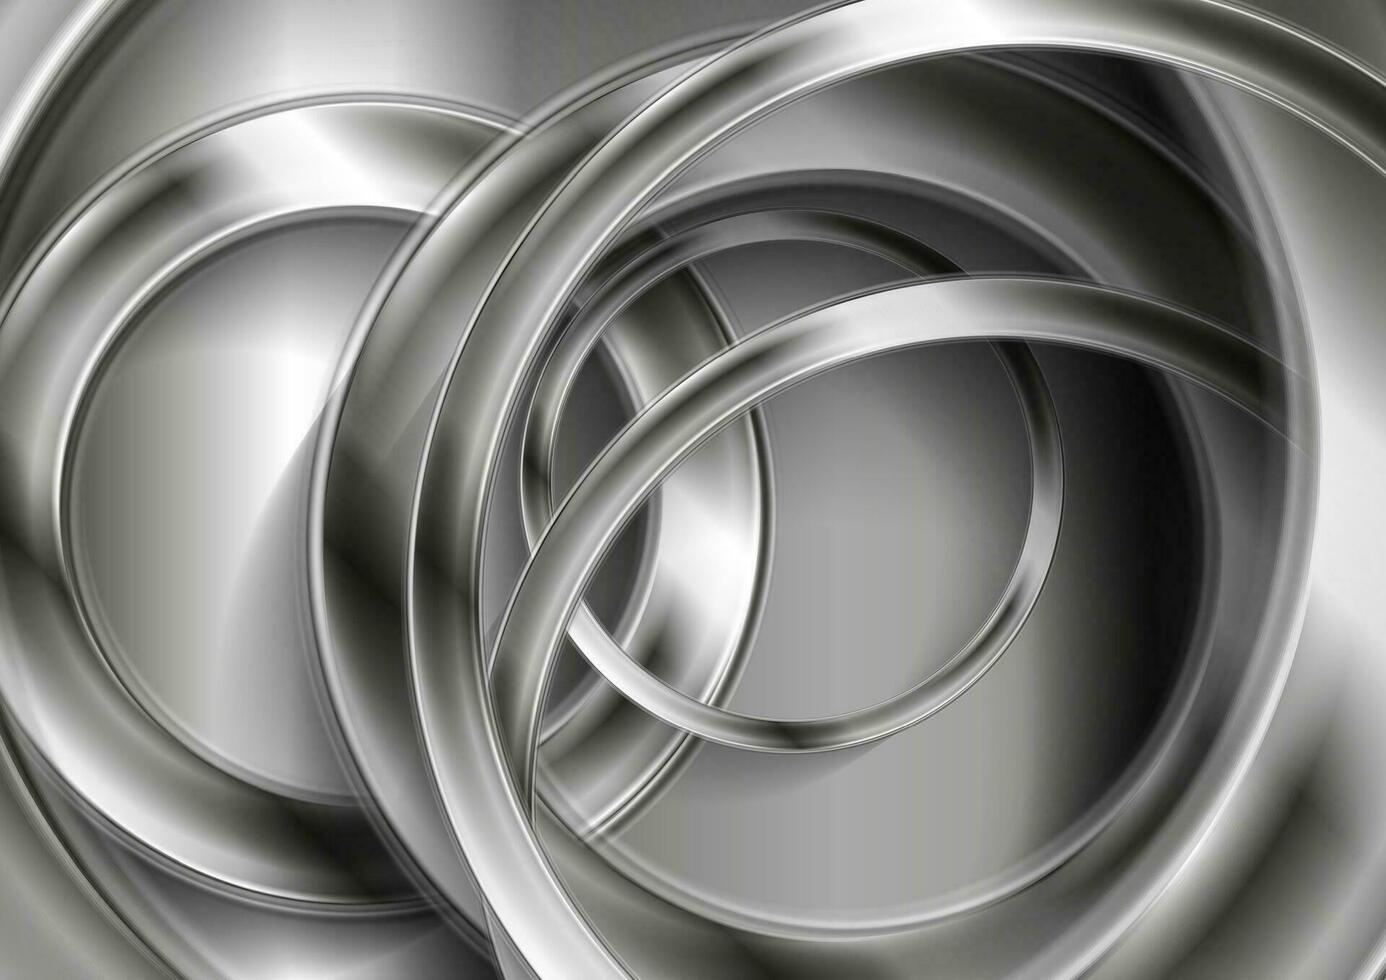 Technology abstract background with metallic grey circles vector